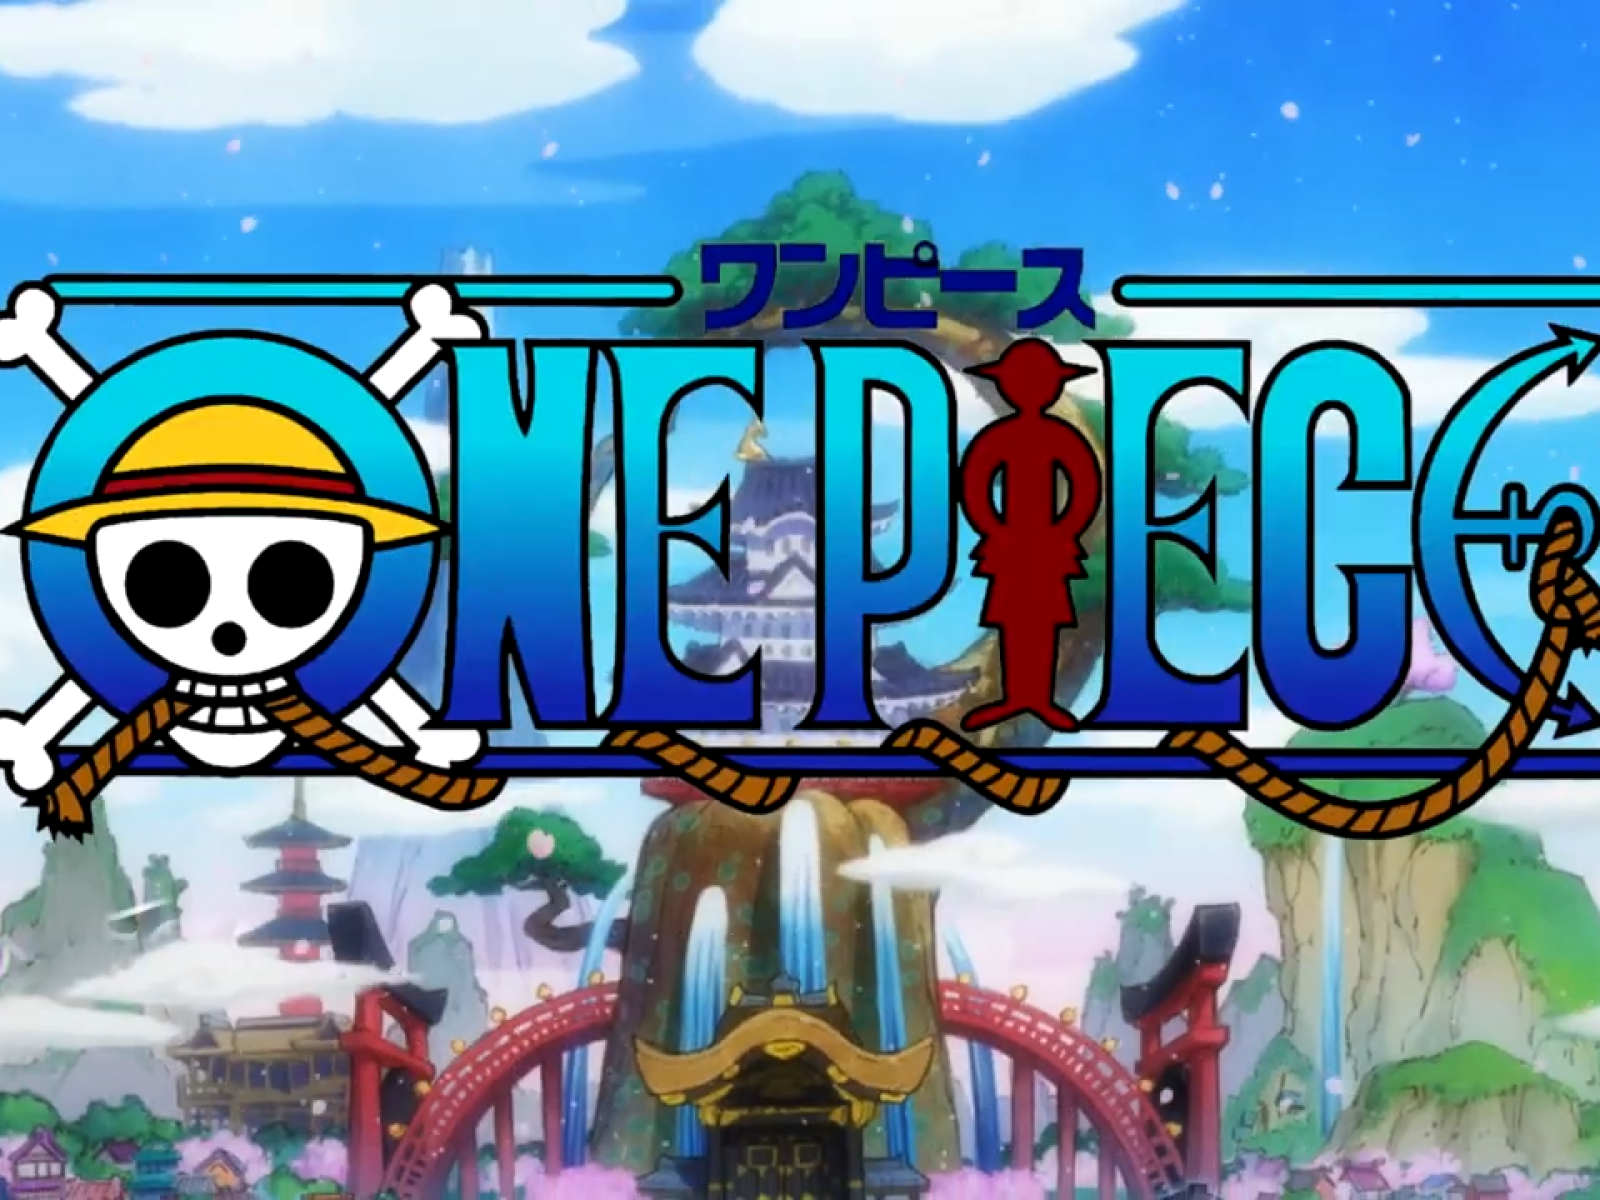 One Piece' Episode 969 Live Stream Details: How To Watch Online, With Spoilers